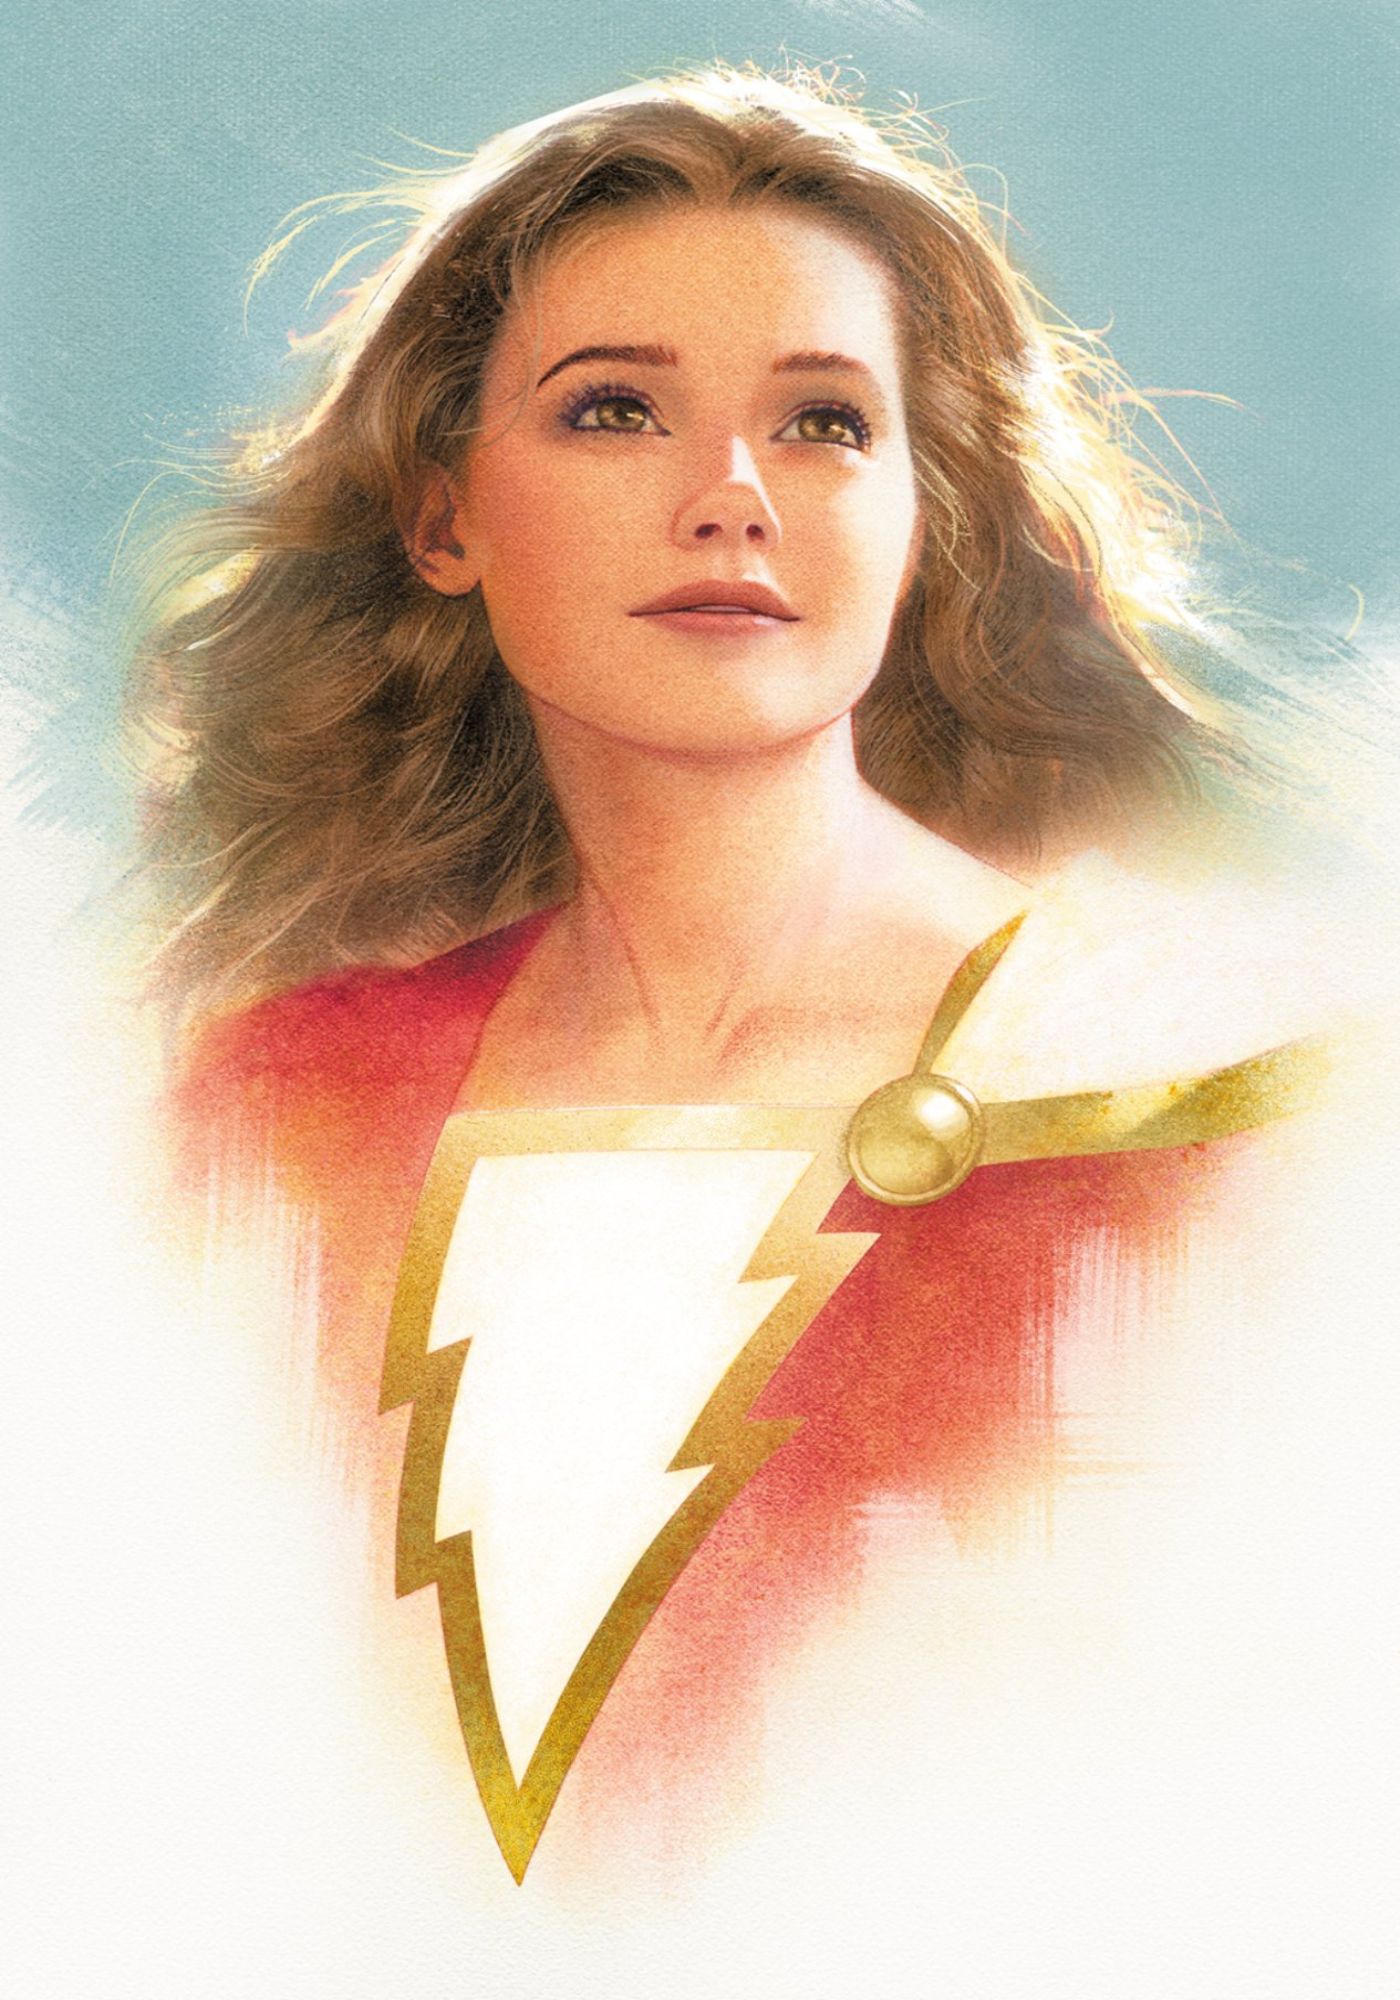 DC’s New Shazam Mary Marvel Gets Gorgeous Official Hero Portrait